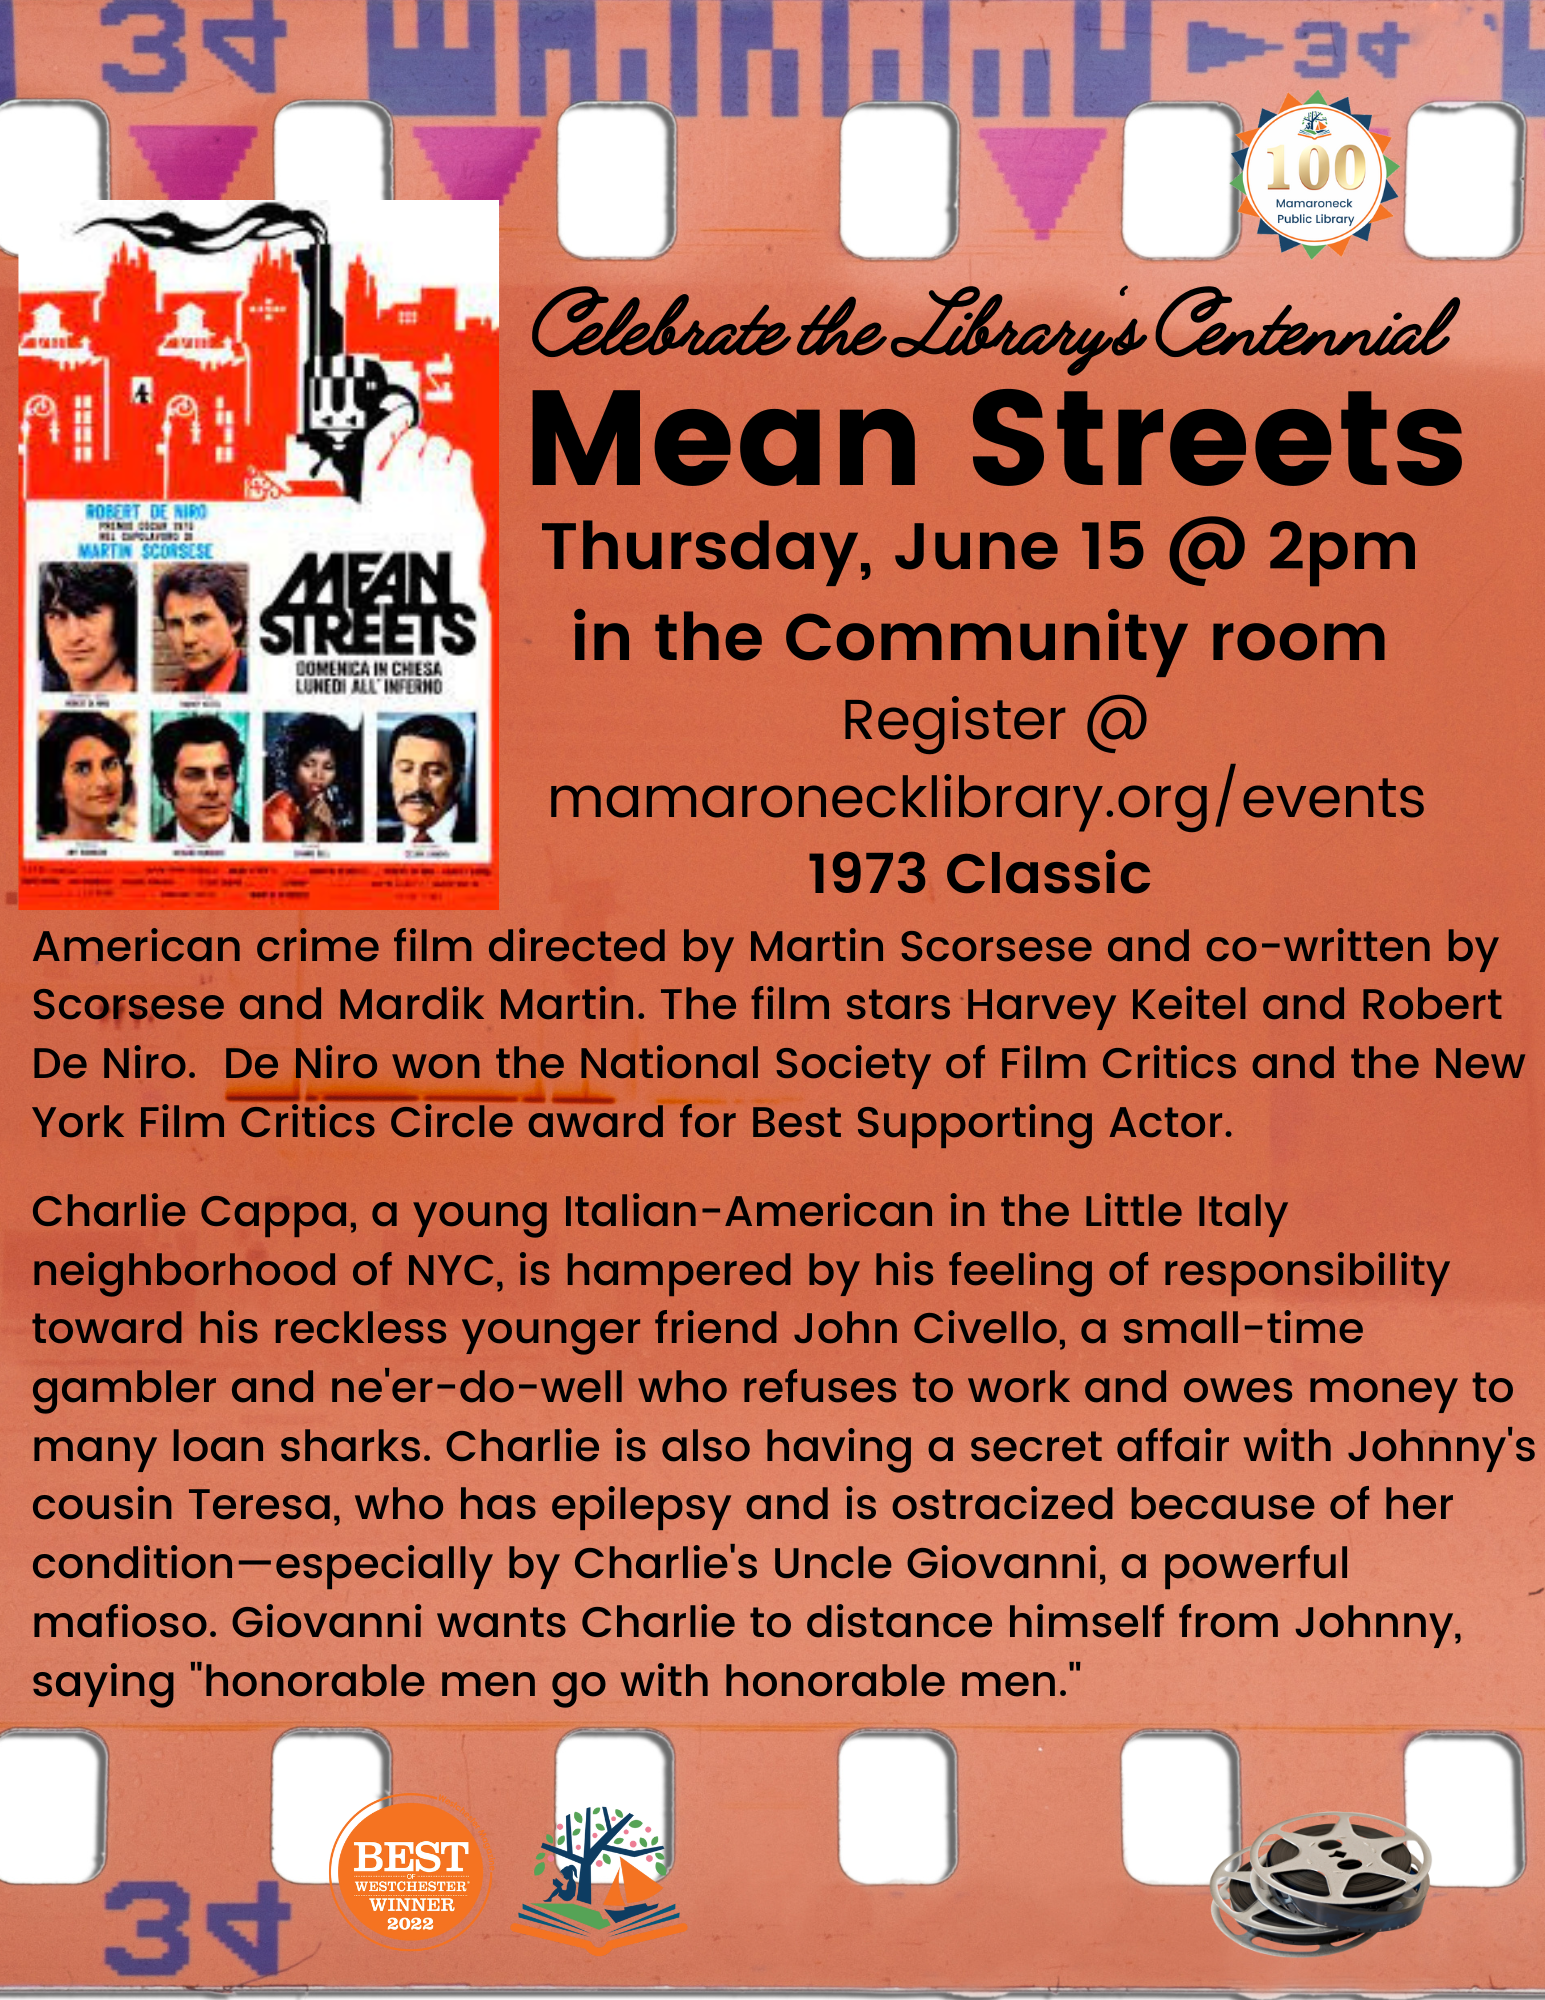 6/15 @ 2pm in the community room: Mean Streets